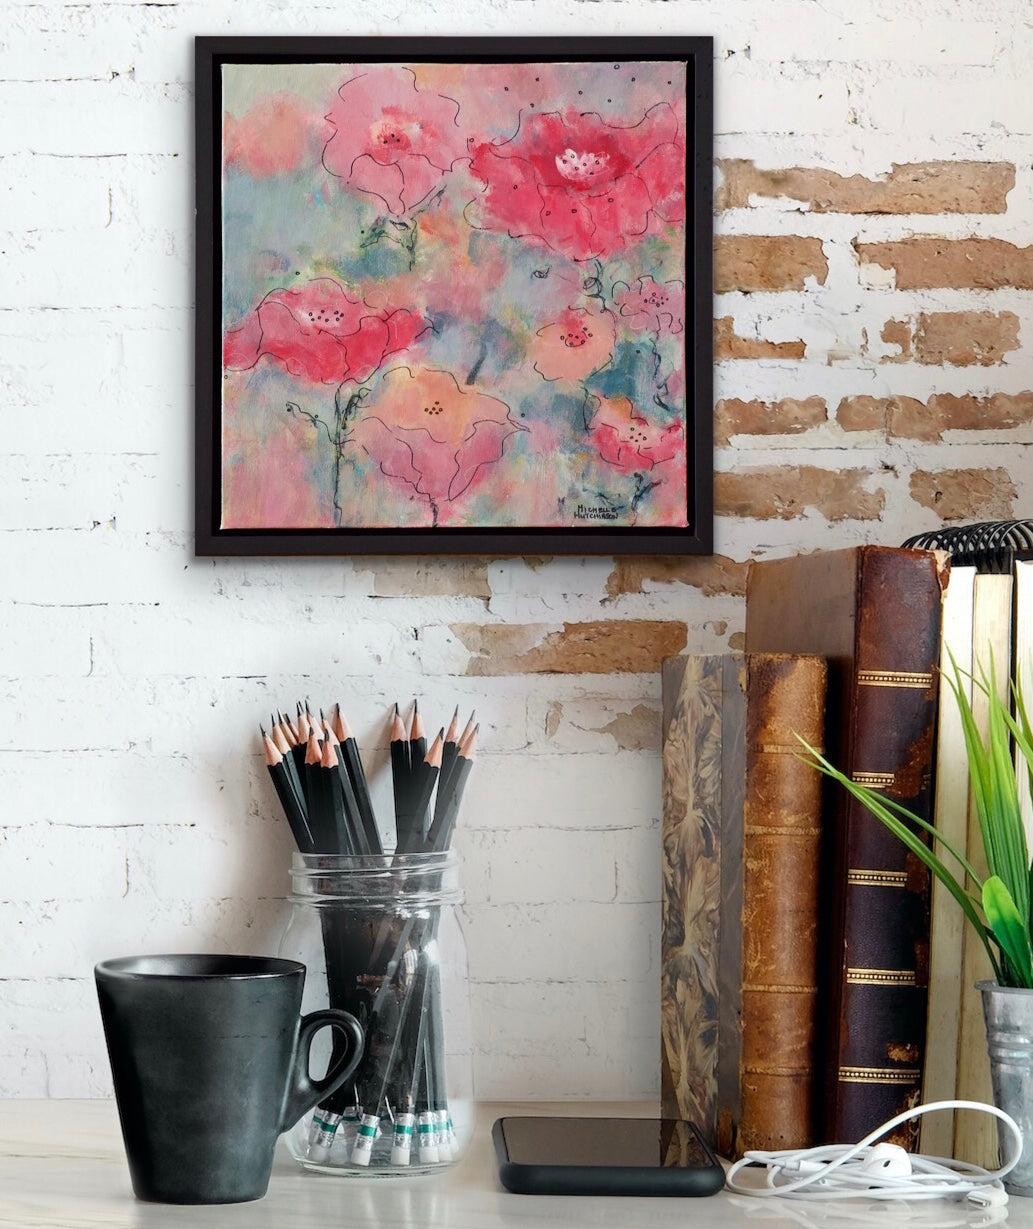 Displayed on a white brick wall above a desk. Abstract flowers in reds, pinks, and corals against a background of blue greens is bursting with colourful personality in this original painting! 